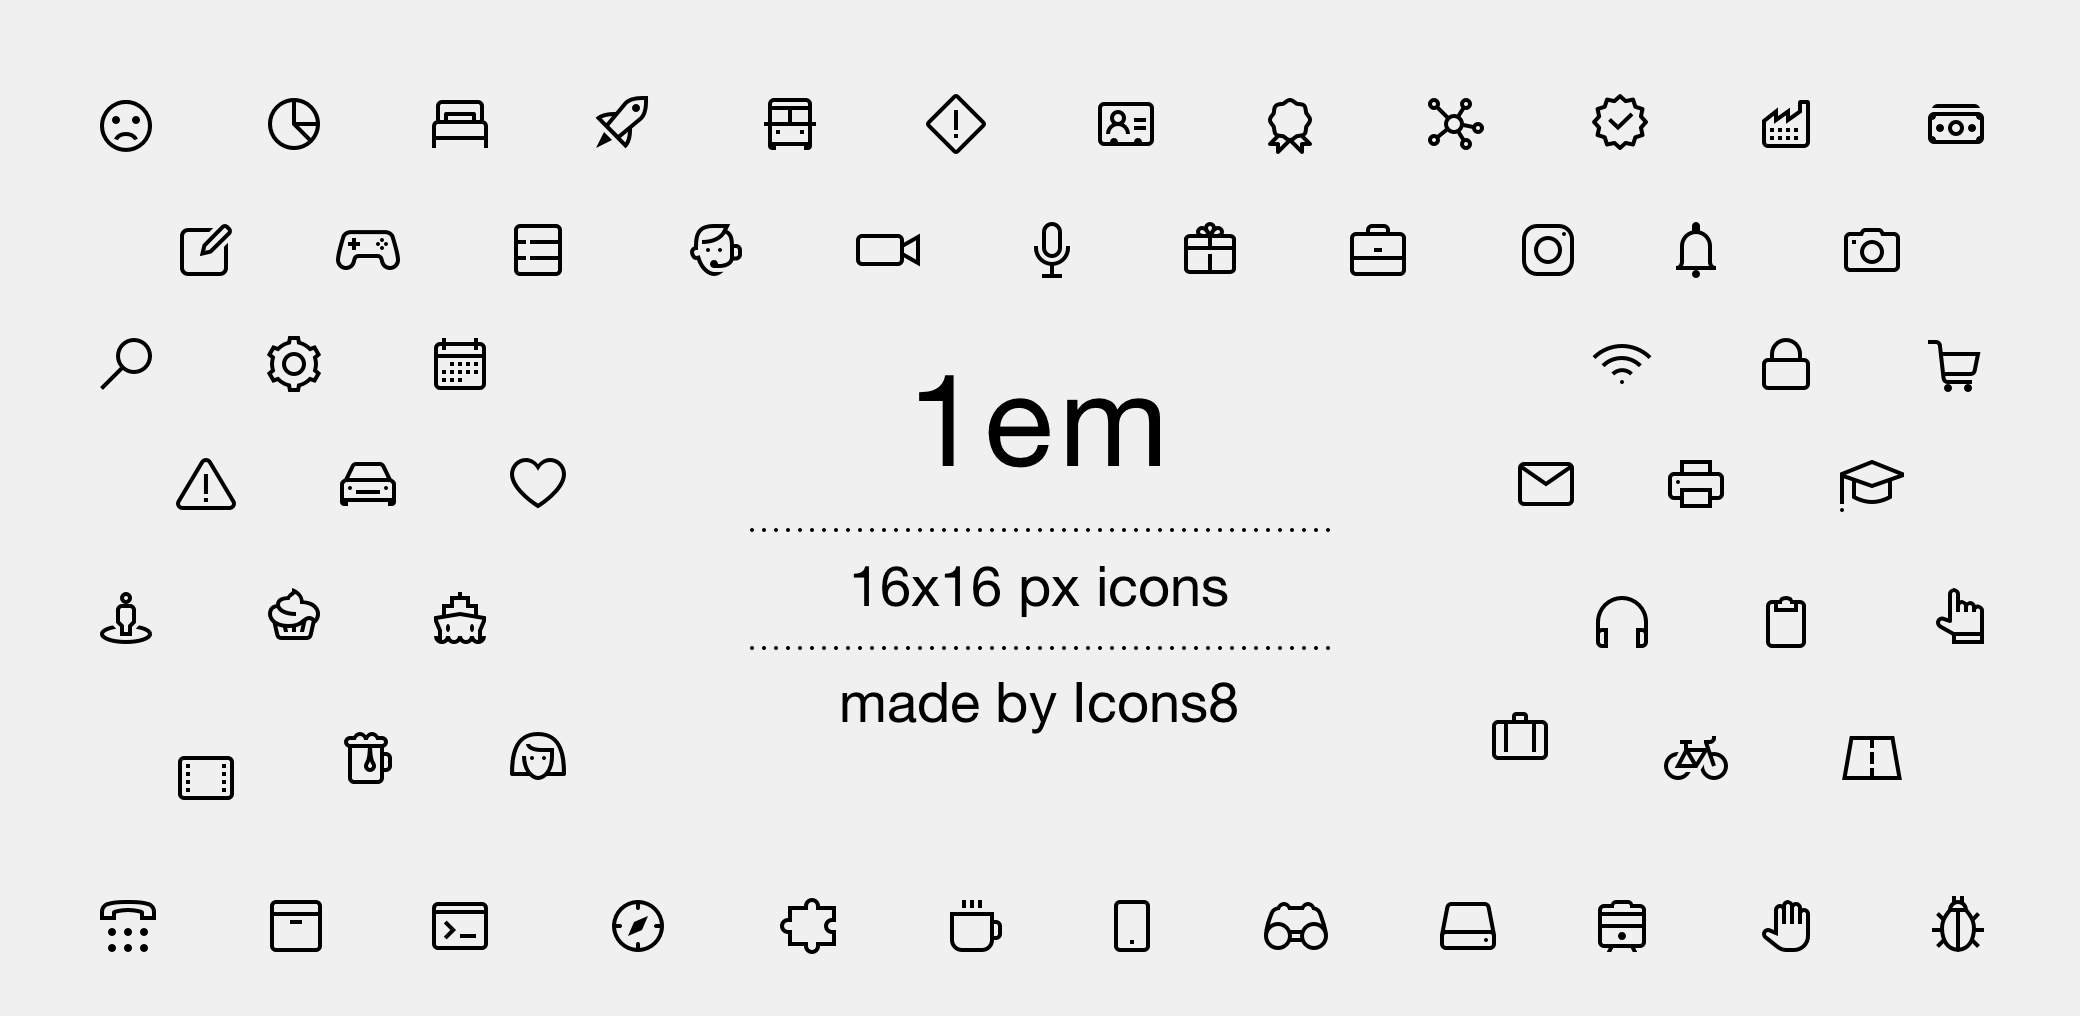 Top 50 Free Icon Sets from 2015